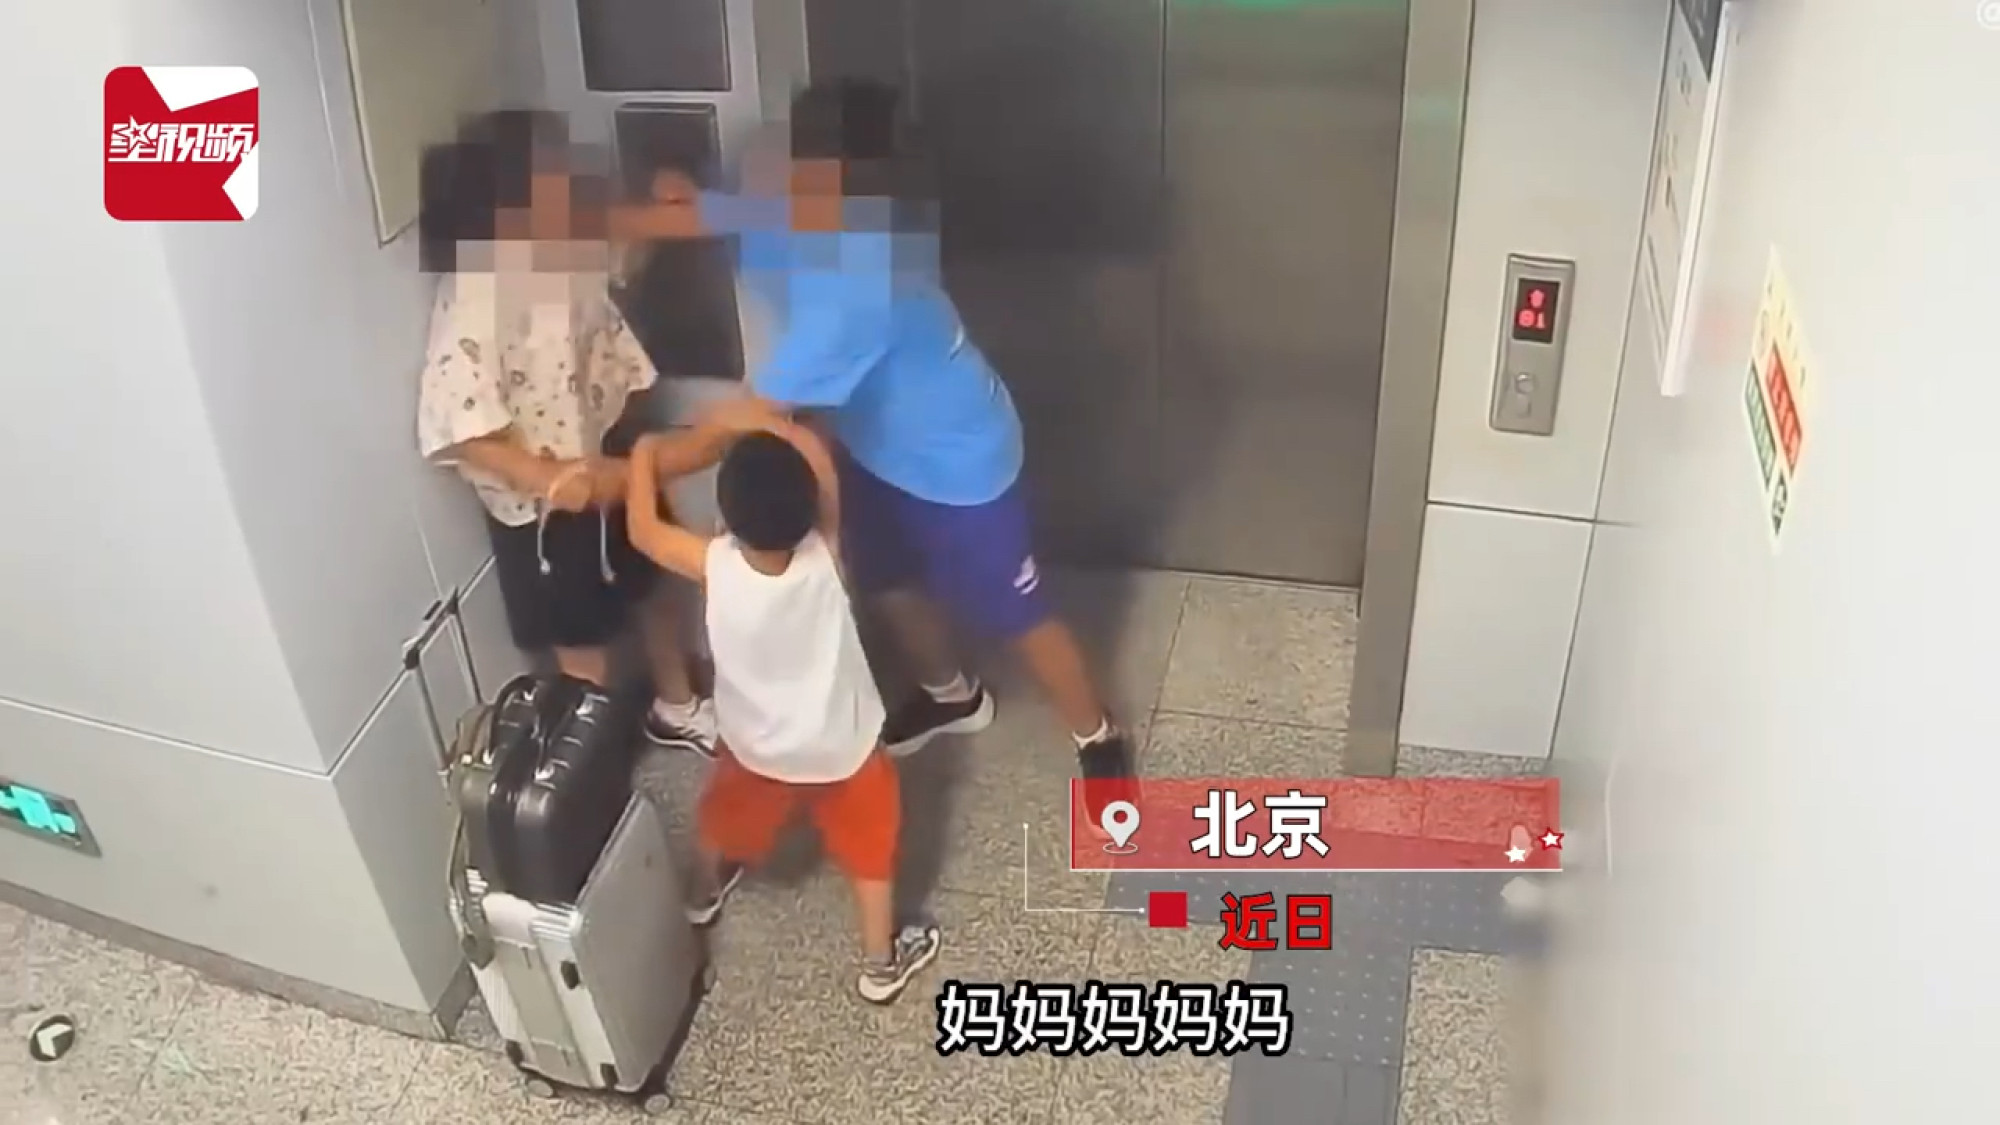 Subway staff members eventually restrained the teen and called police, who arrived shortly afterwards. Photo: Baidu